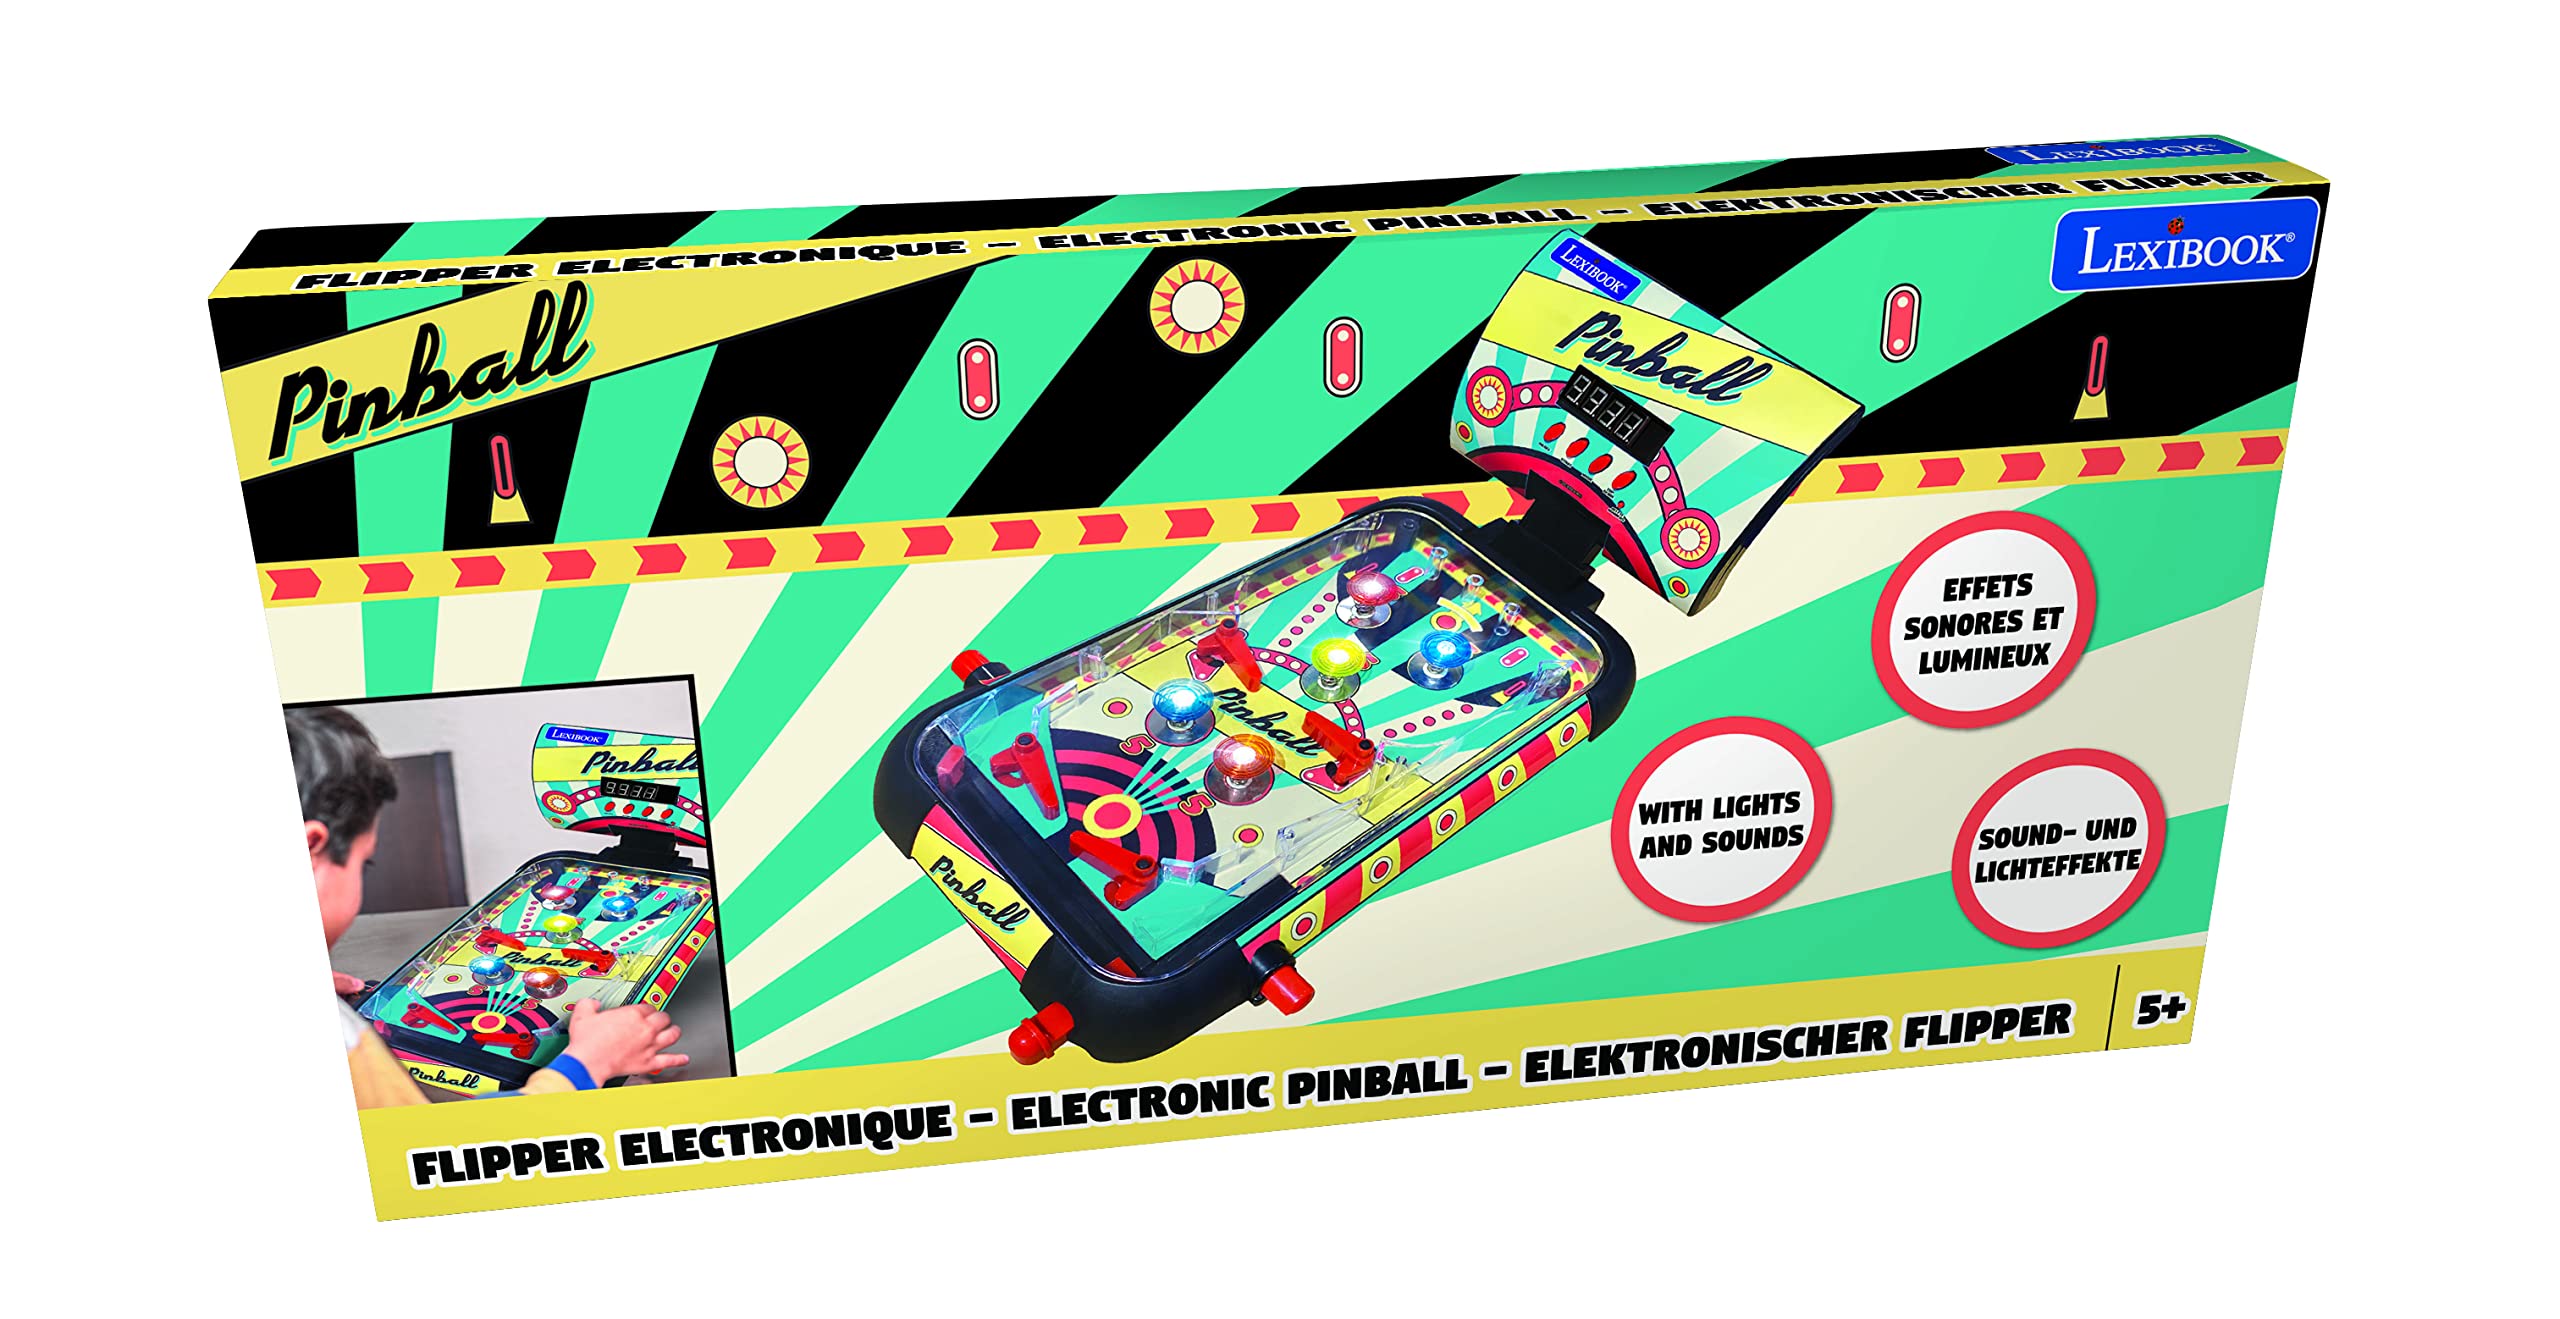 LEXiBOOK Table Electronic Pinball, Action and Reflex Game for Children and Family, LCD Screen, Light and Sound Effects, JG610